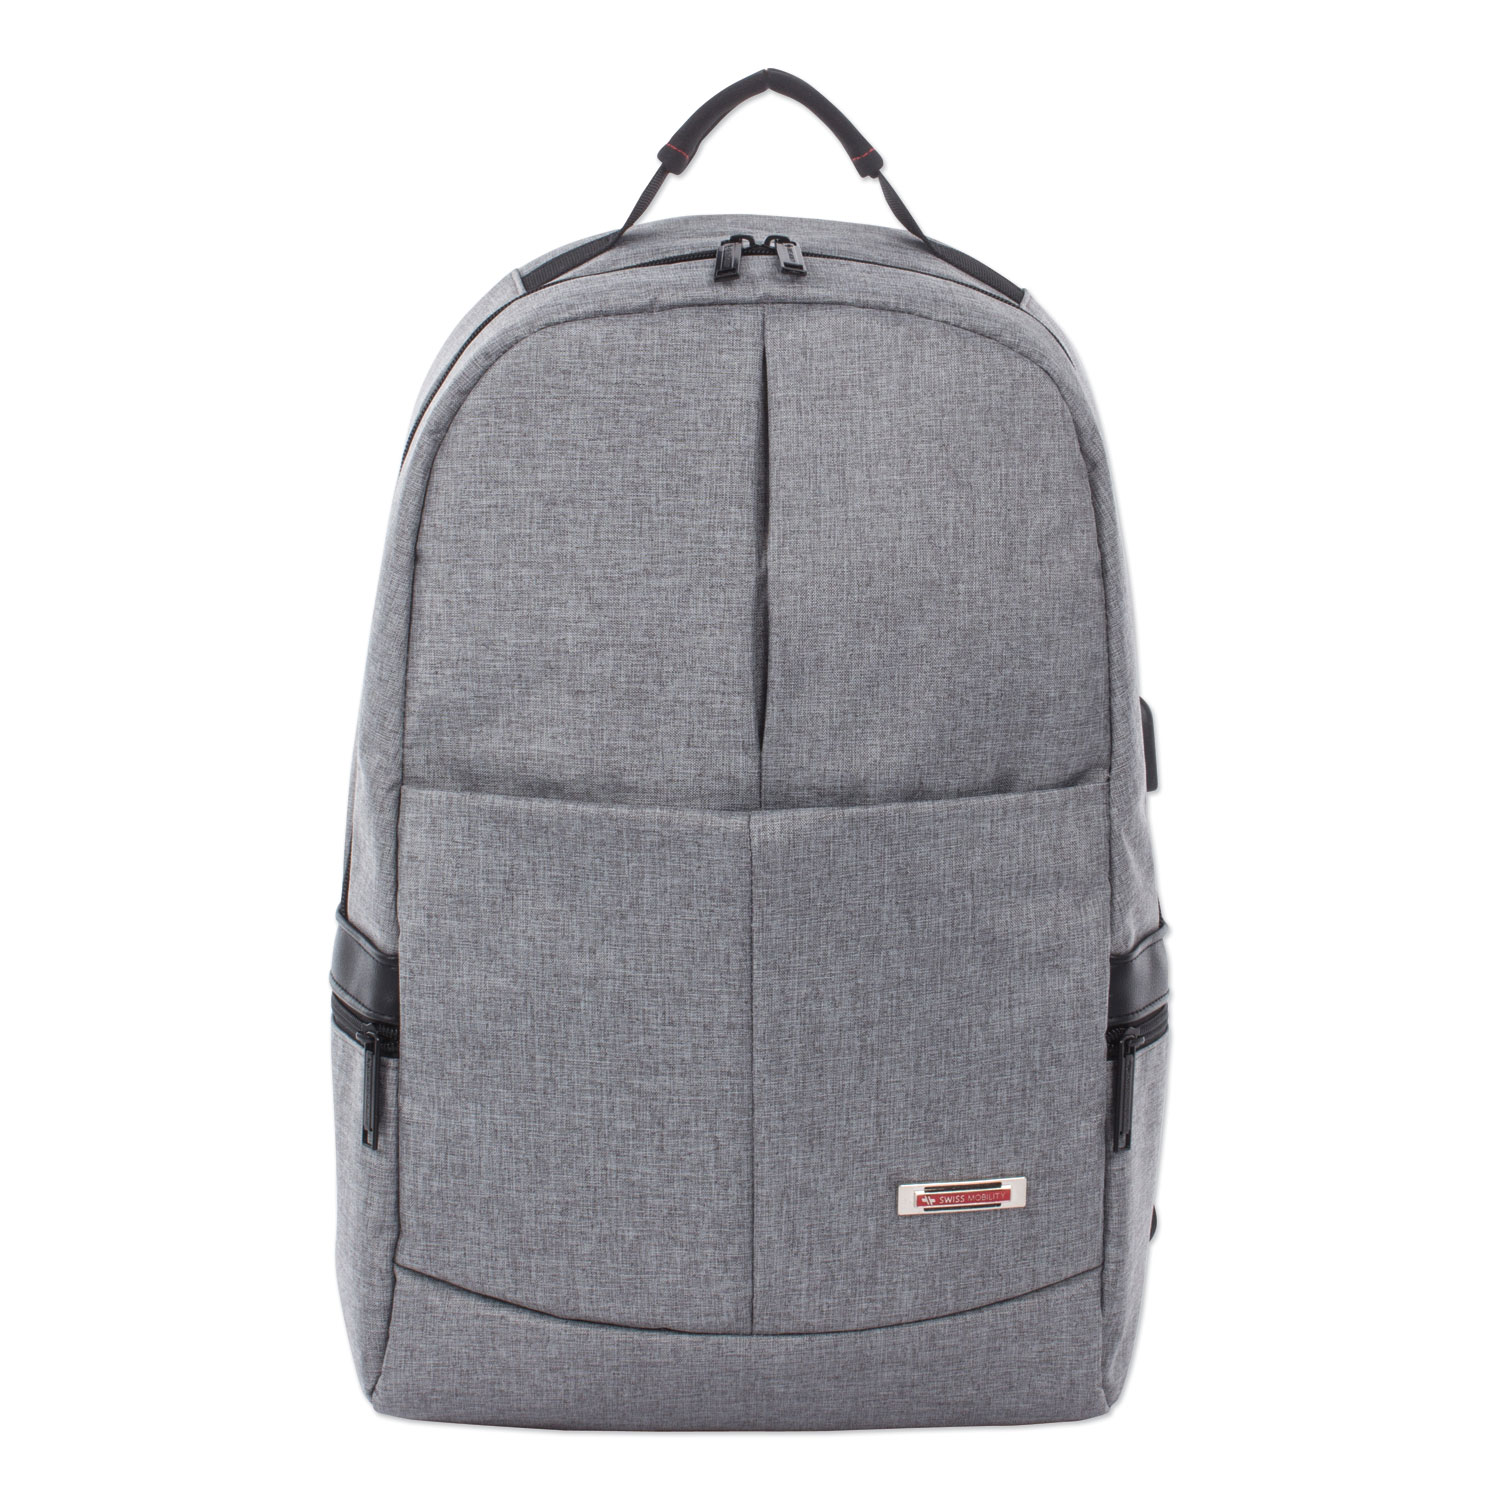  Swiss Mobility BKP1066SMGRY Sterling Slim Business Backpack, Holds Laptops 15.6, 5.5 x 5.5 x 18, Gray (SWZBKP1066SMGRY) 